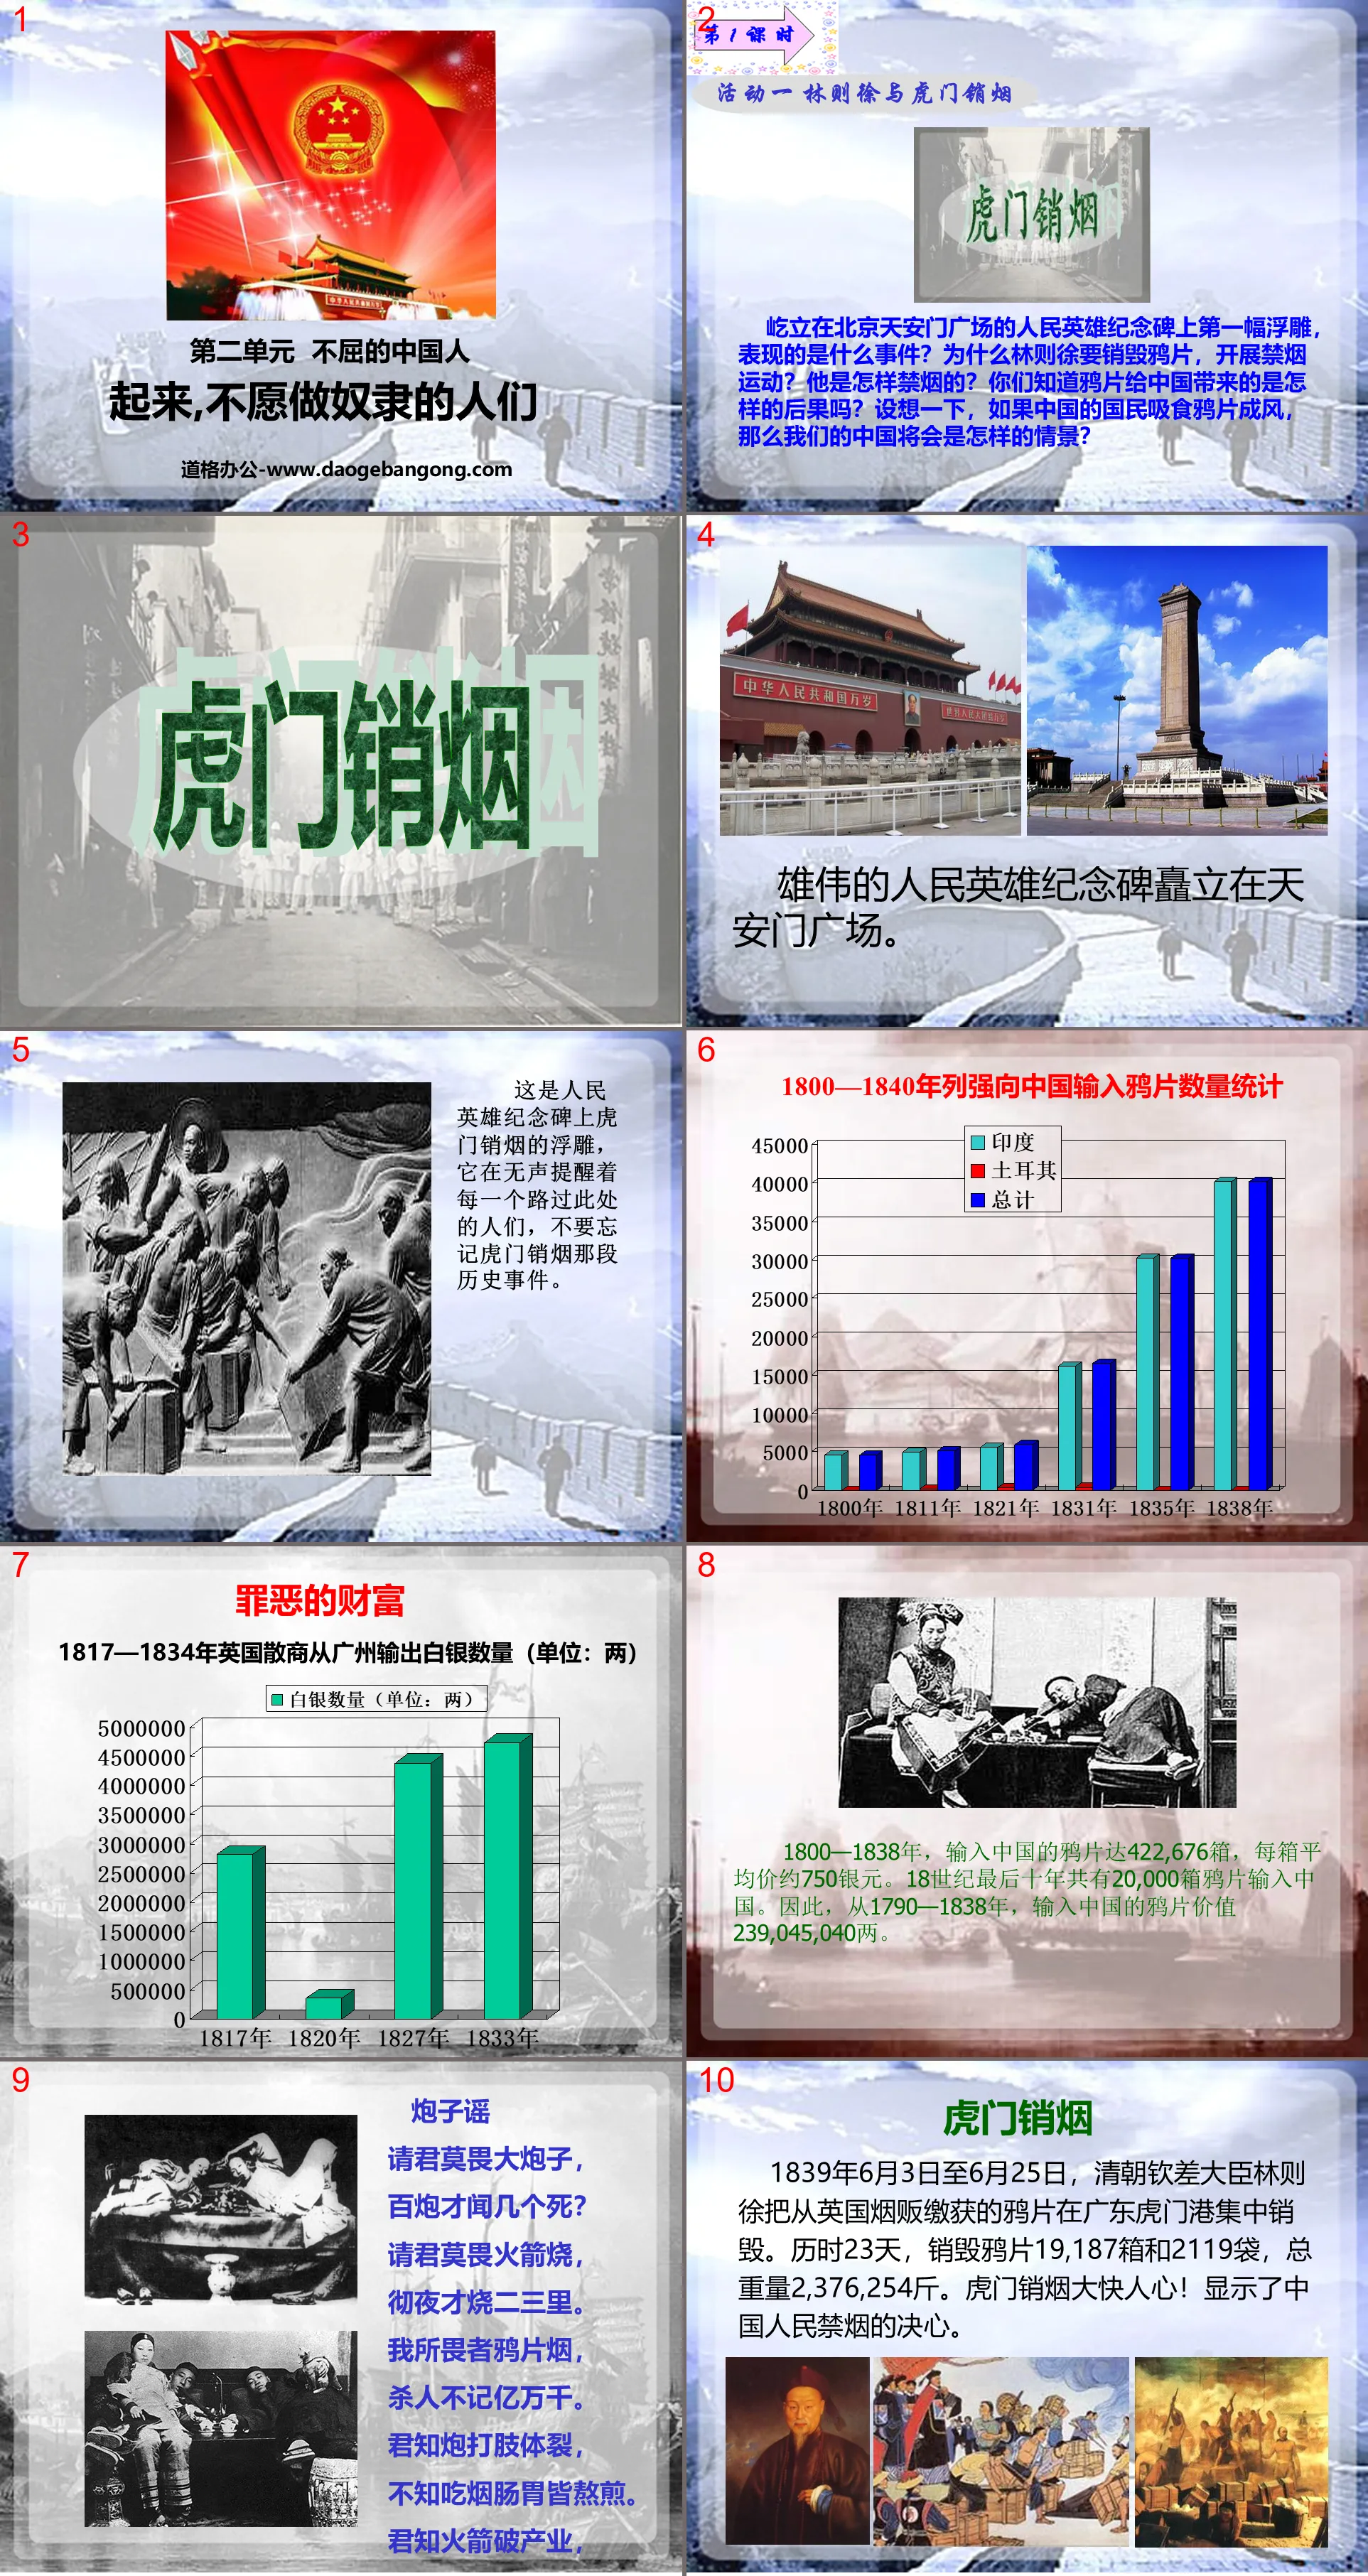 "Get up, people who don't want to be slaves" PPT courseware of the unyielding Chinese